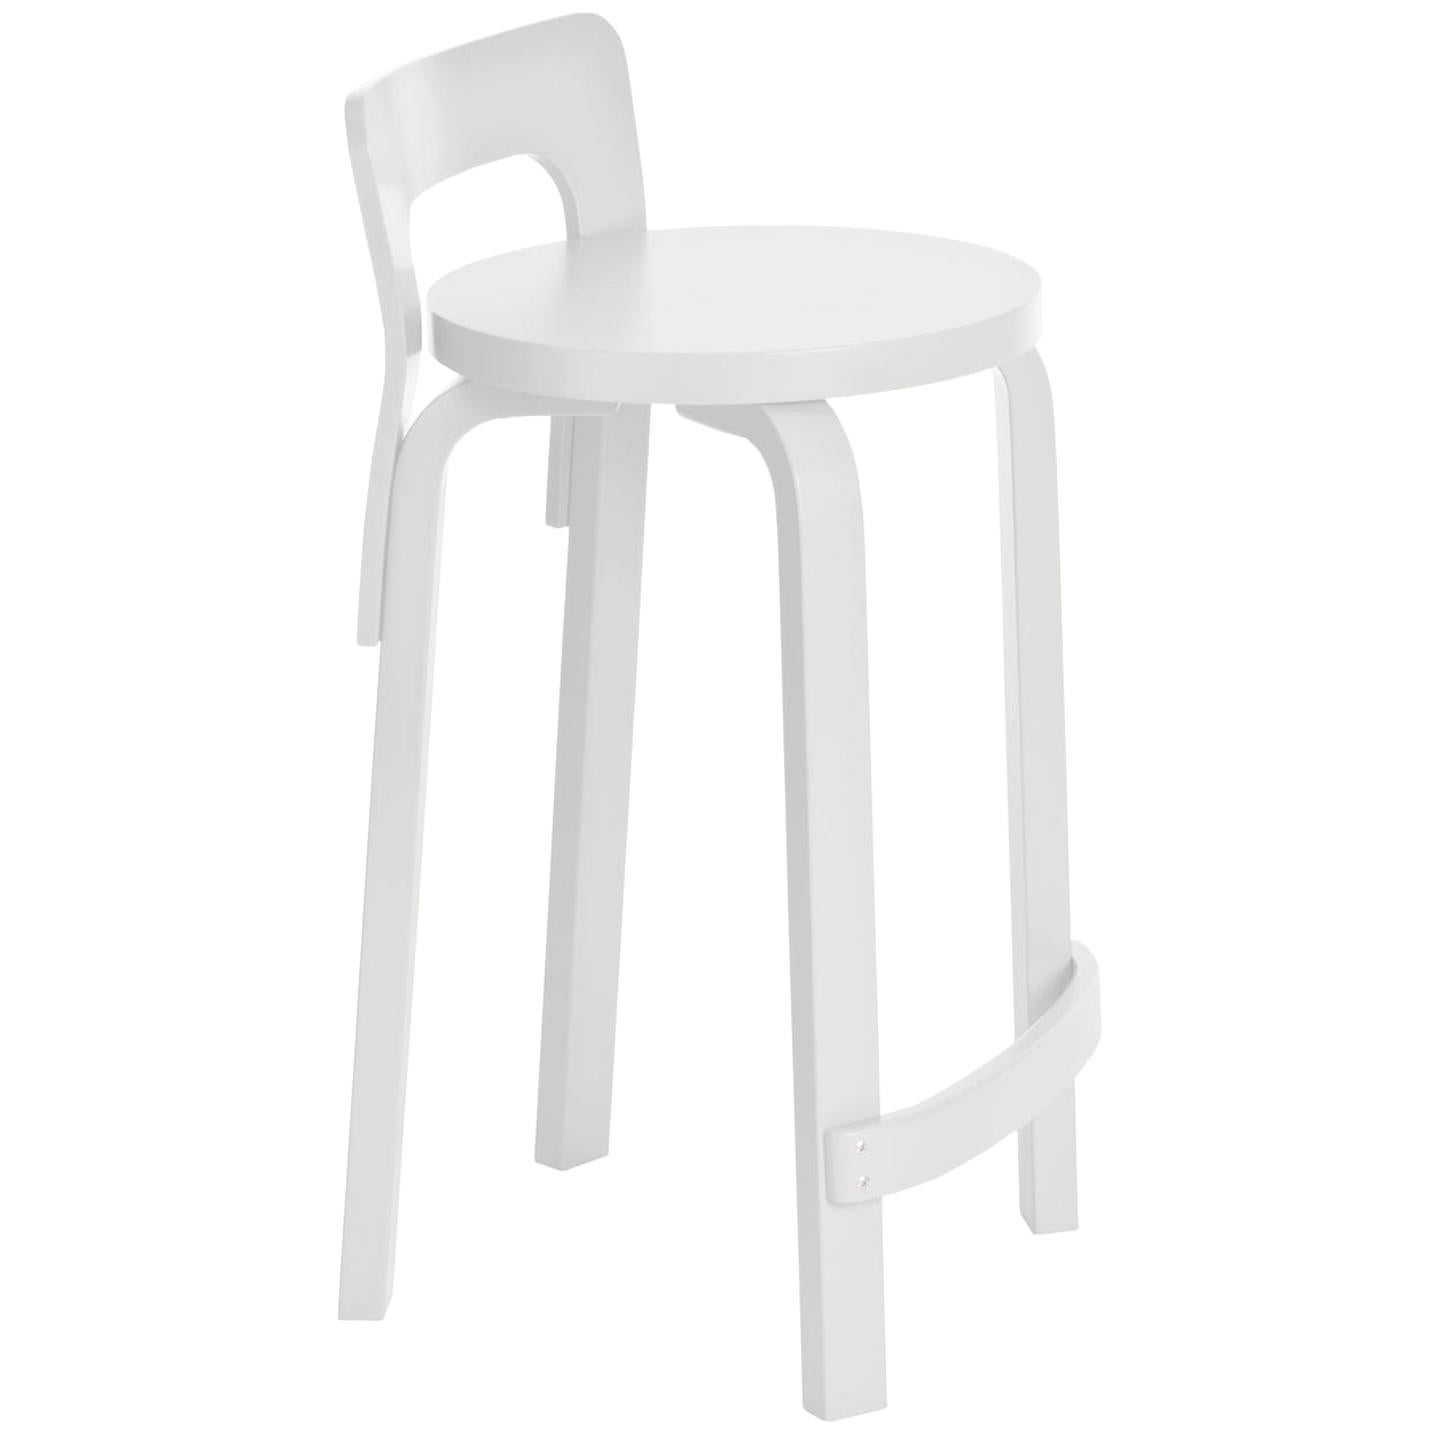 Authentic High Chair K65 in Birch with White Lacquer by Alvar Aalto & Artek For Sale